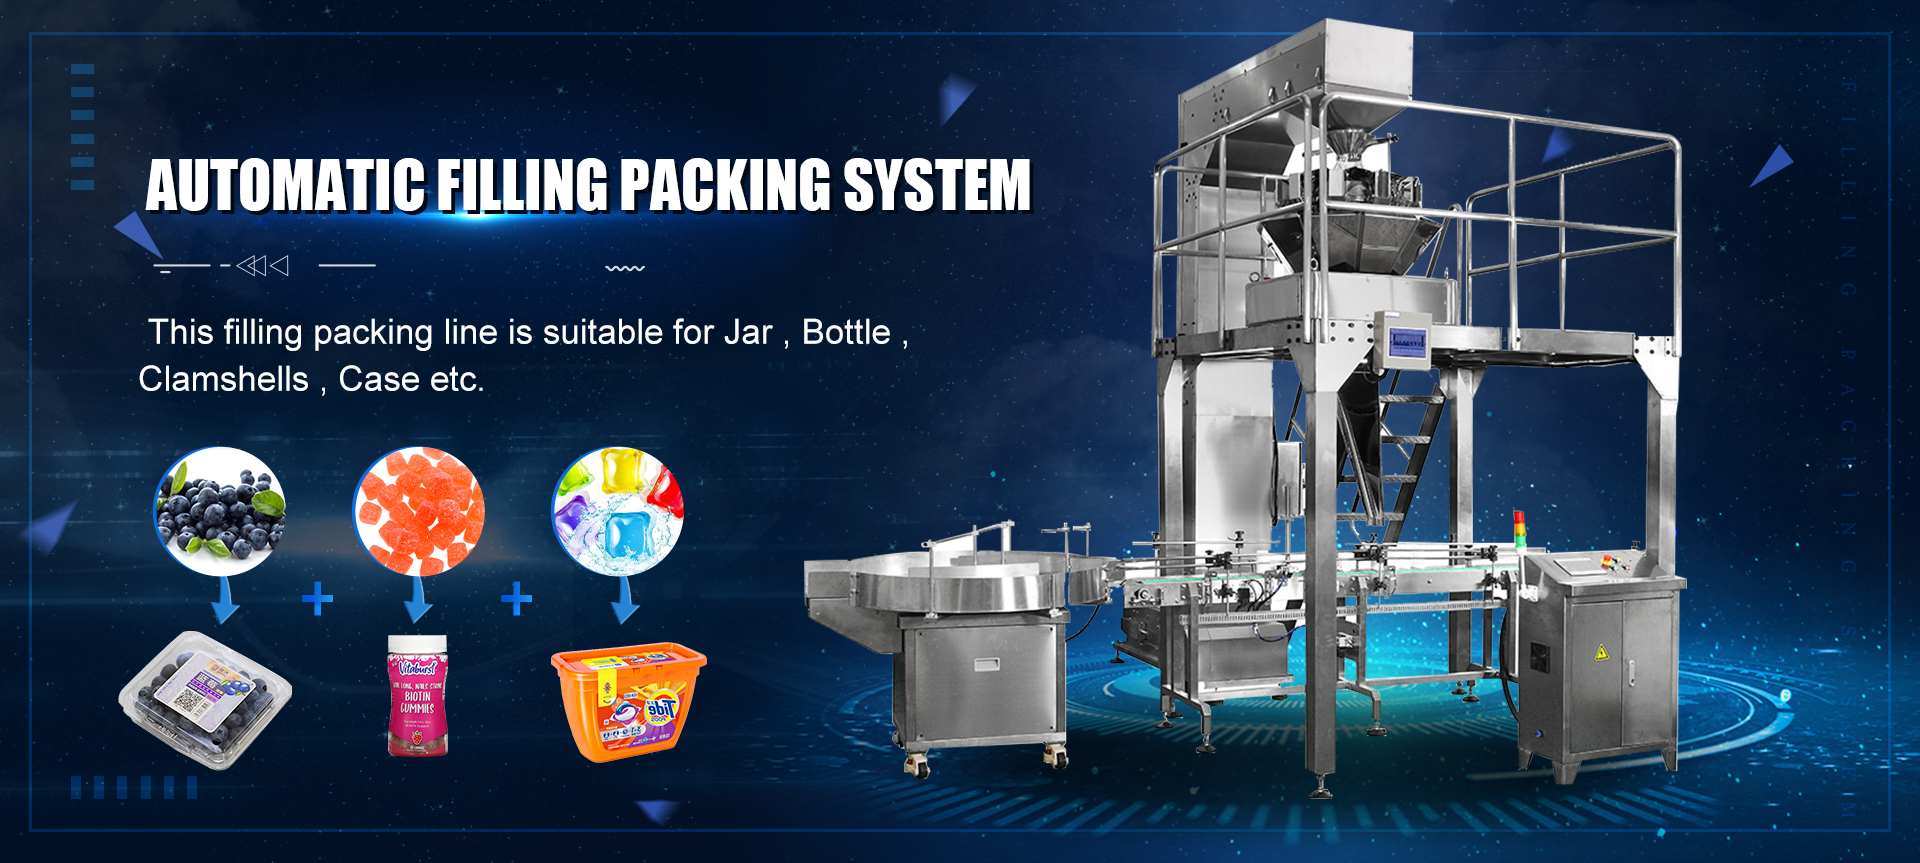 Vertical Packing Machine, Food Packing Machine, Pouch Sealing Machine - Zon Pack